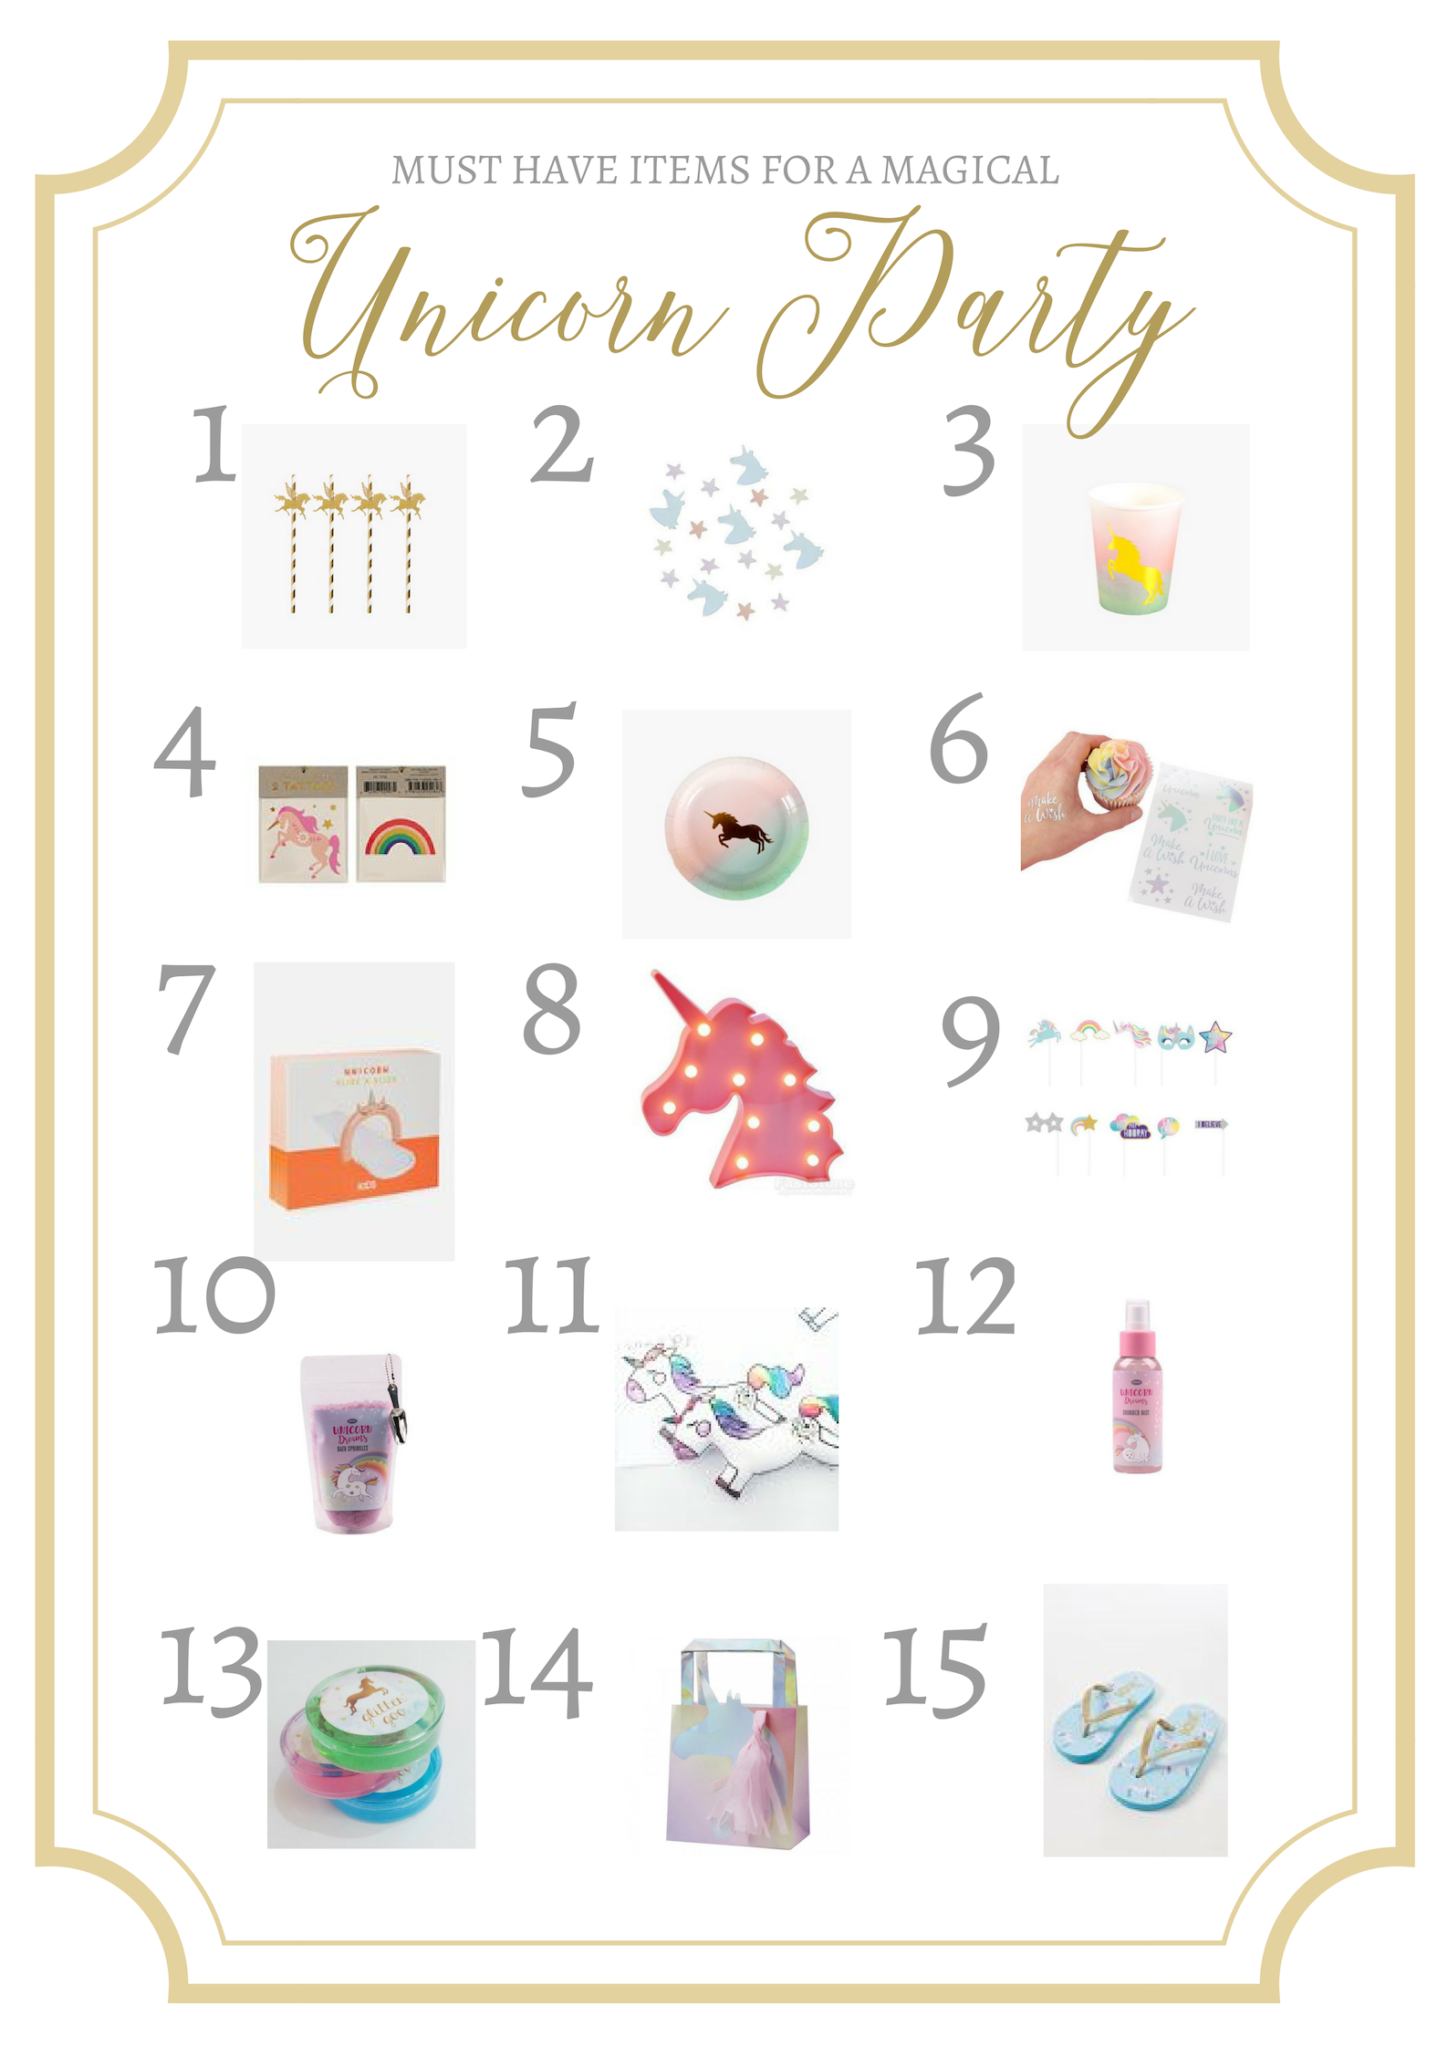 List of must have items for a magical unicorn party